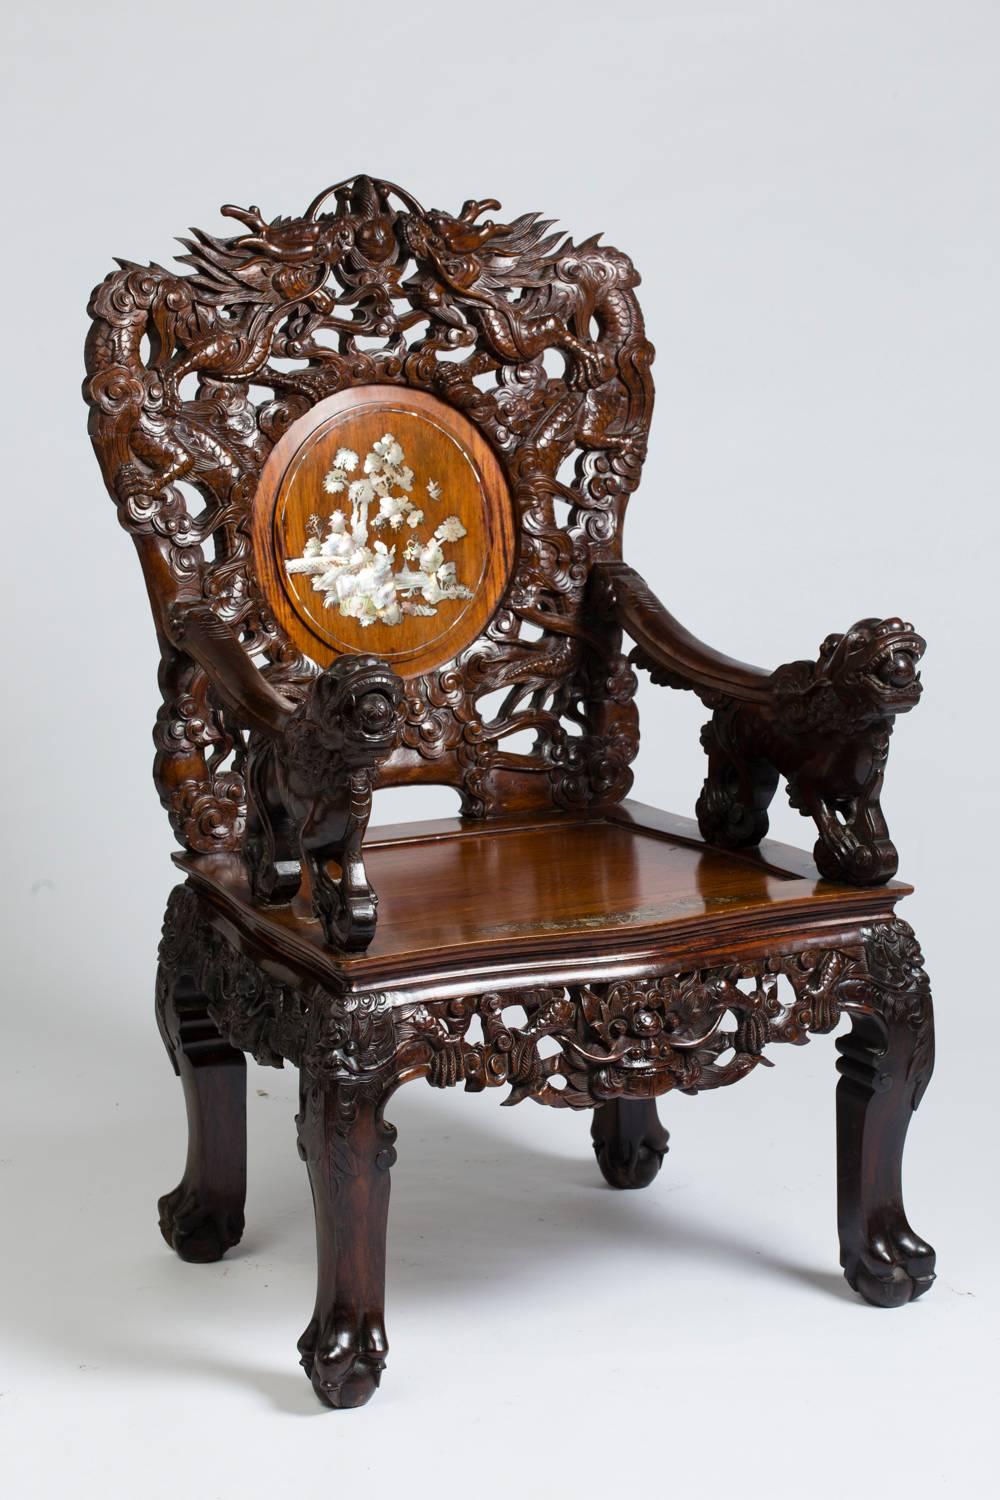 Four beautiful Indochinese armchairs in carved wood with numerous incrustations of mother-of-pearl engraved and re-ornamented.